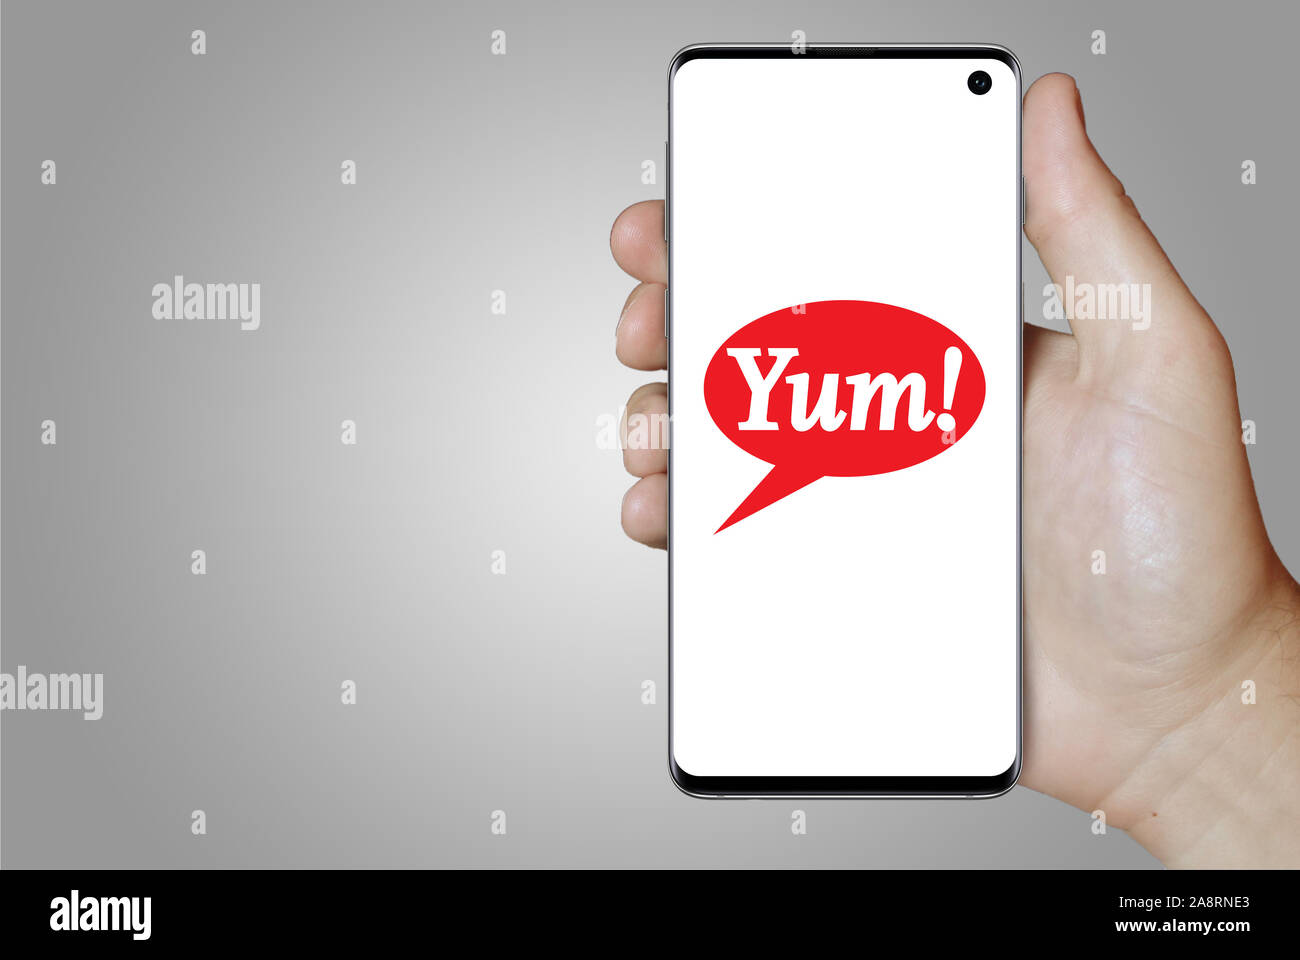 Logo of public company Yum! Brands Inc displayed on a smartphone. Grey background. Credit: PIXDUCE Stock Photo